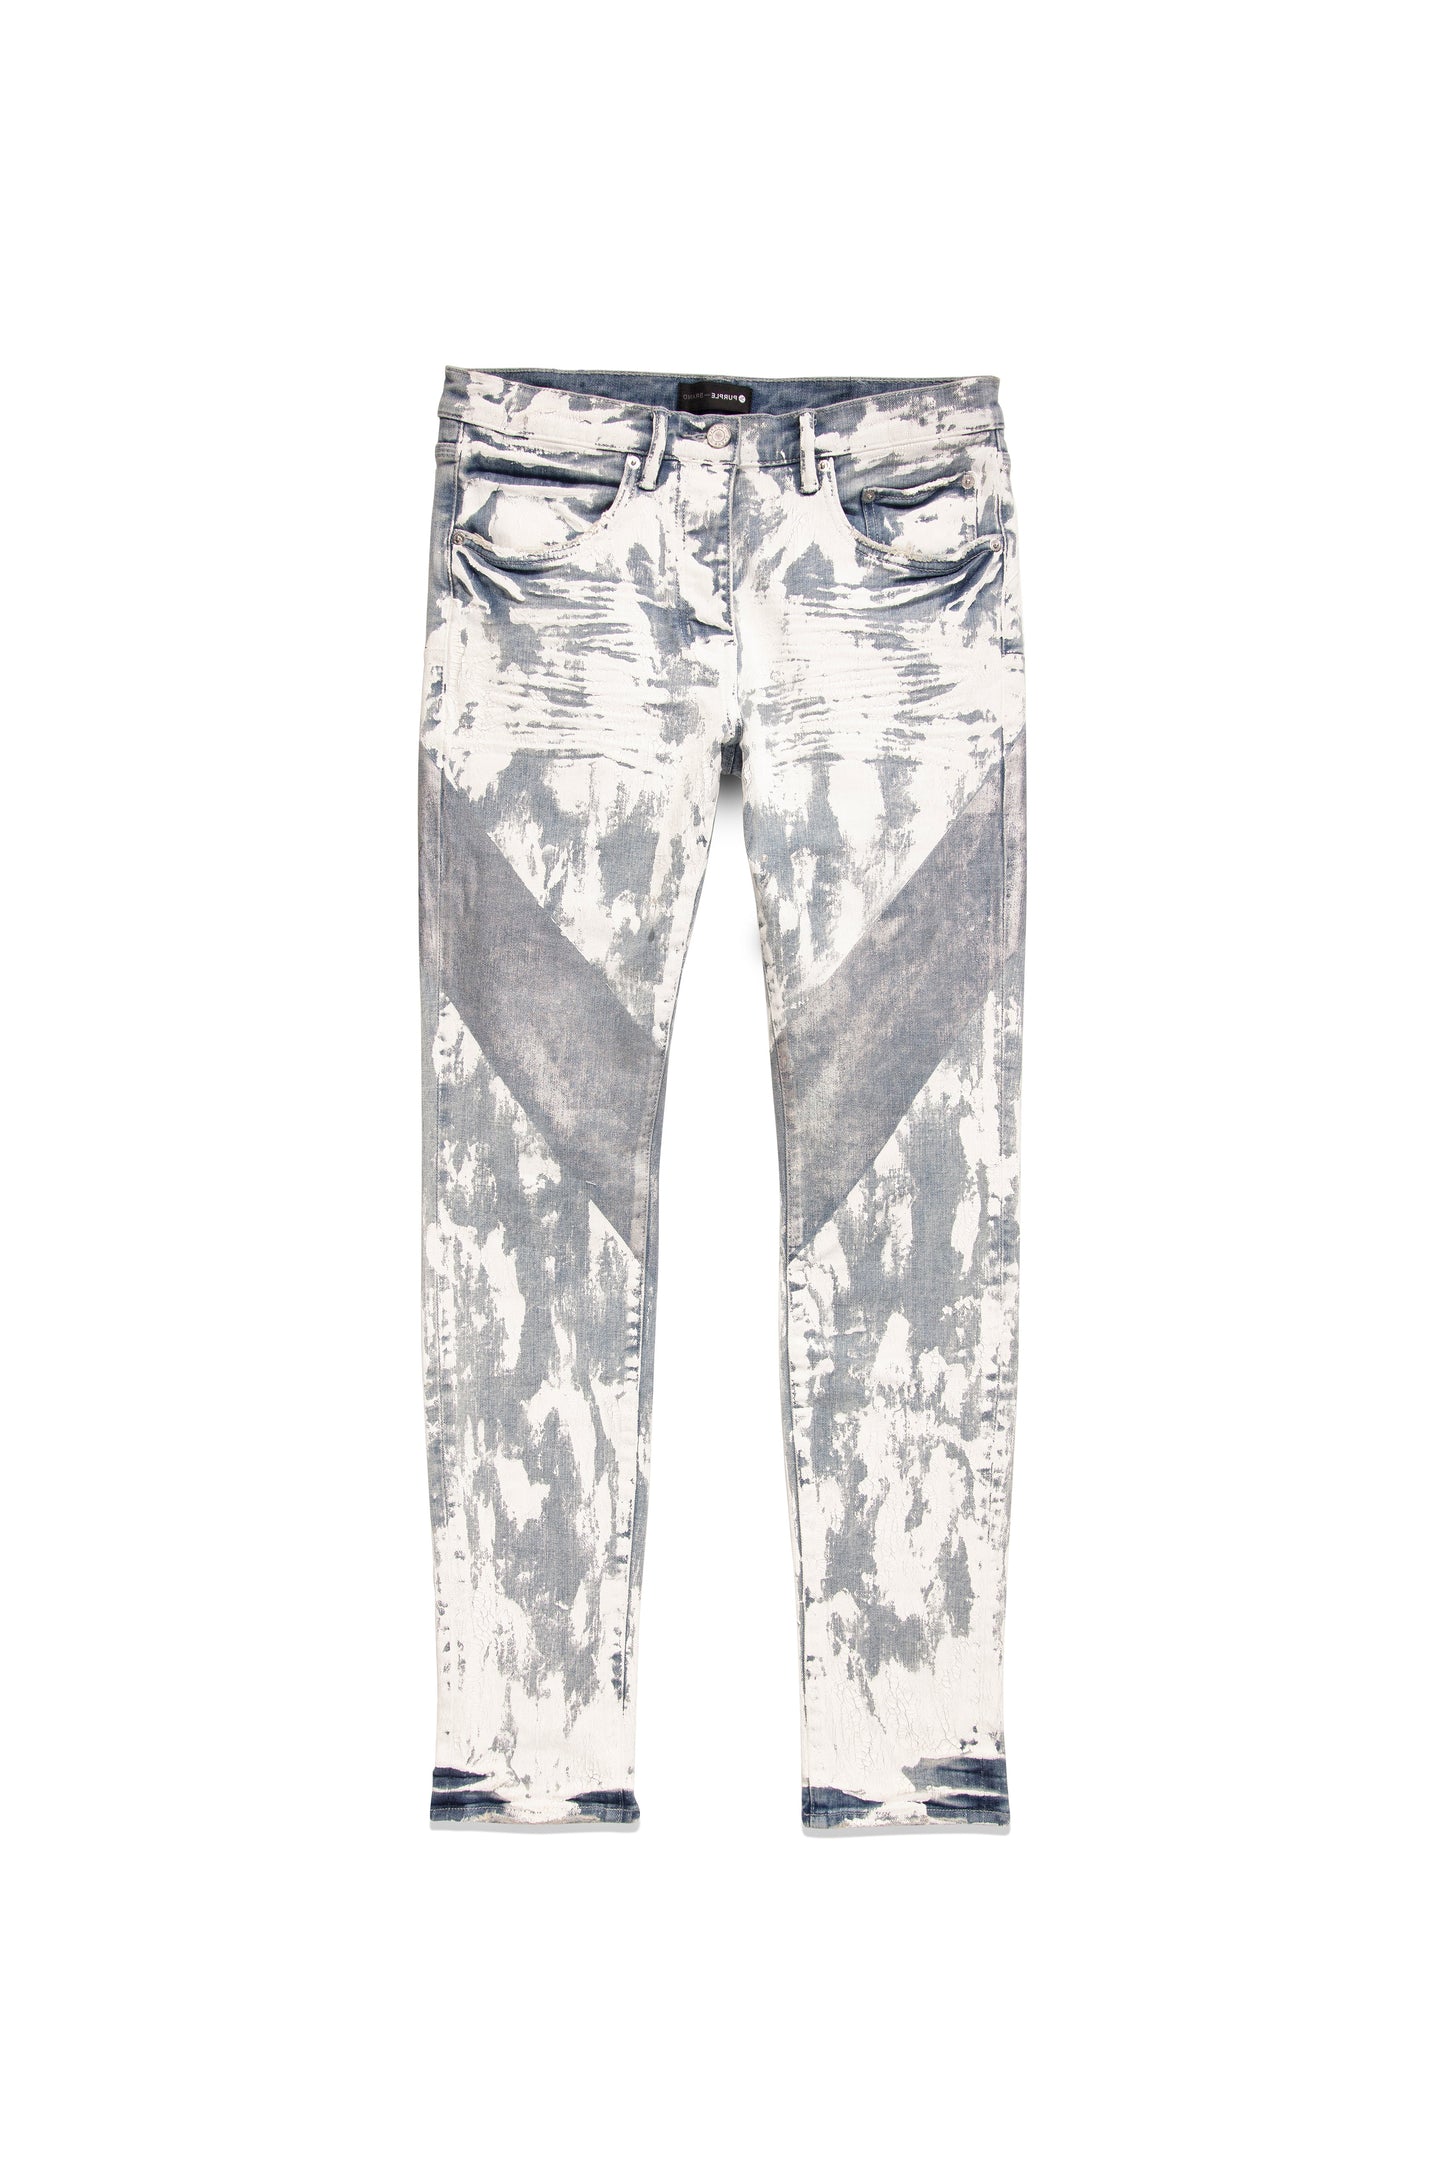 P001 LOW RISE SKINNY JEAN - Light Indigo Crackle Paint With Foil